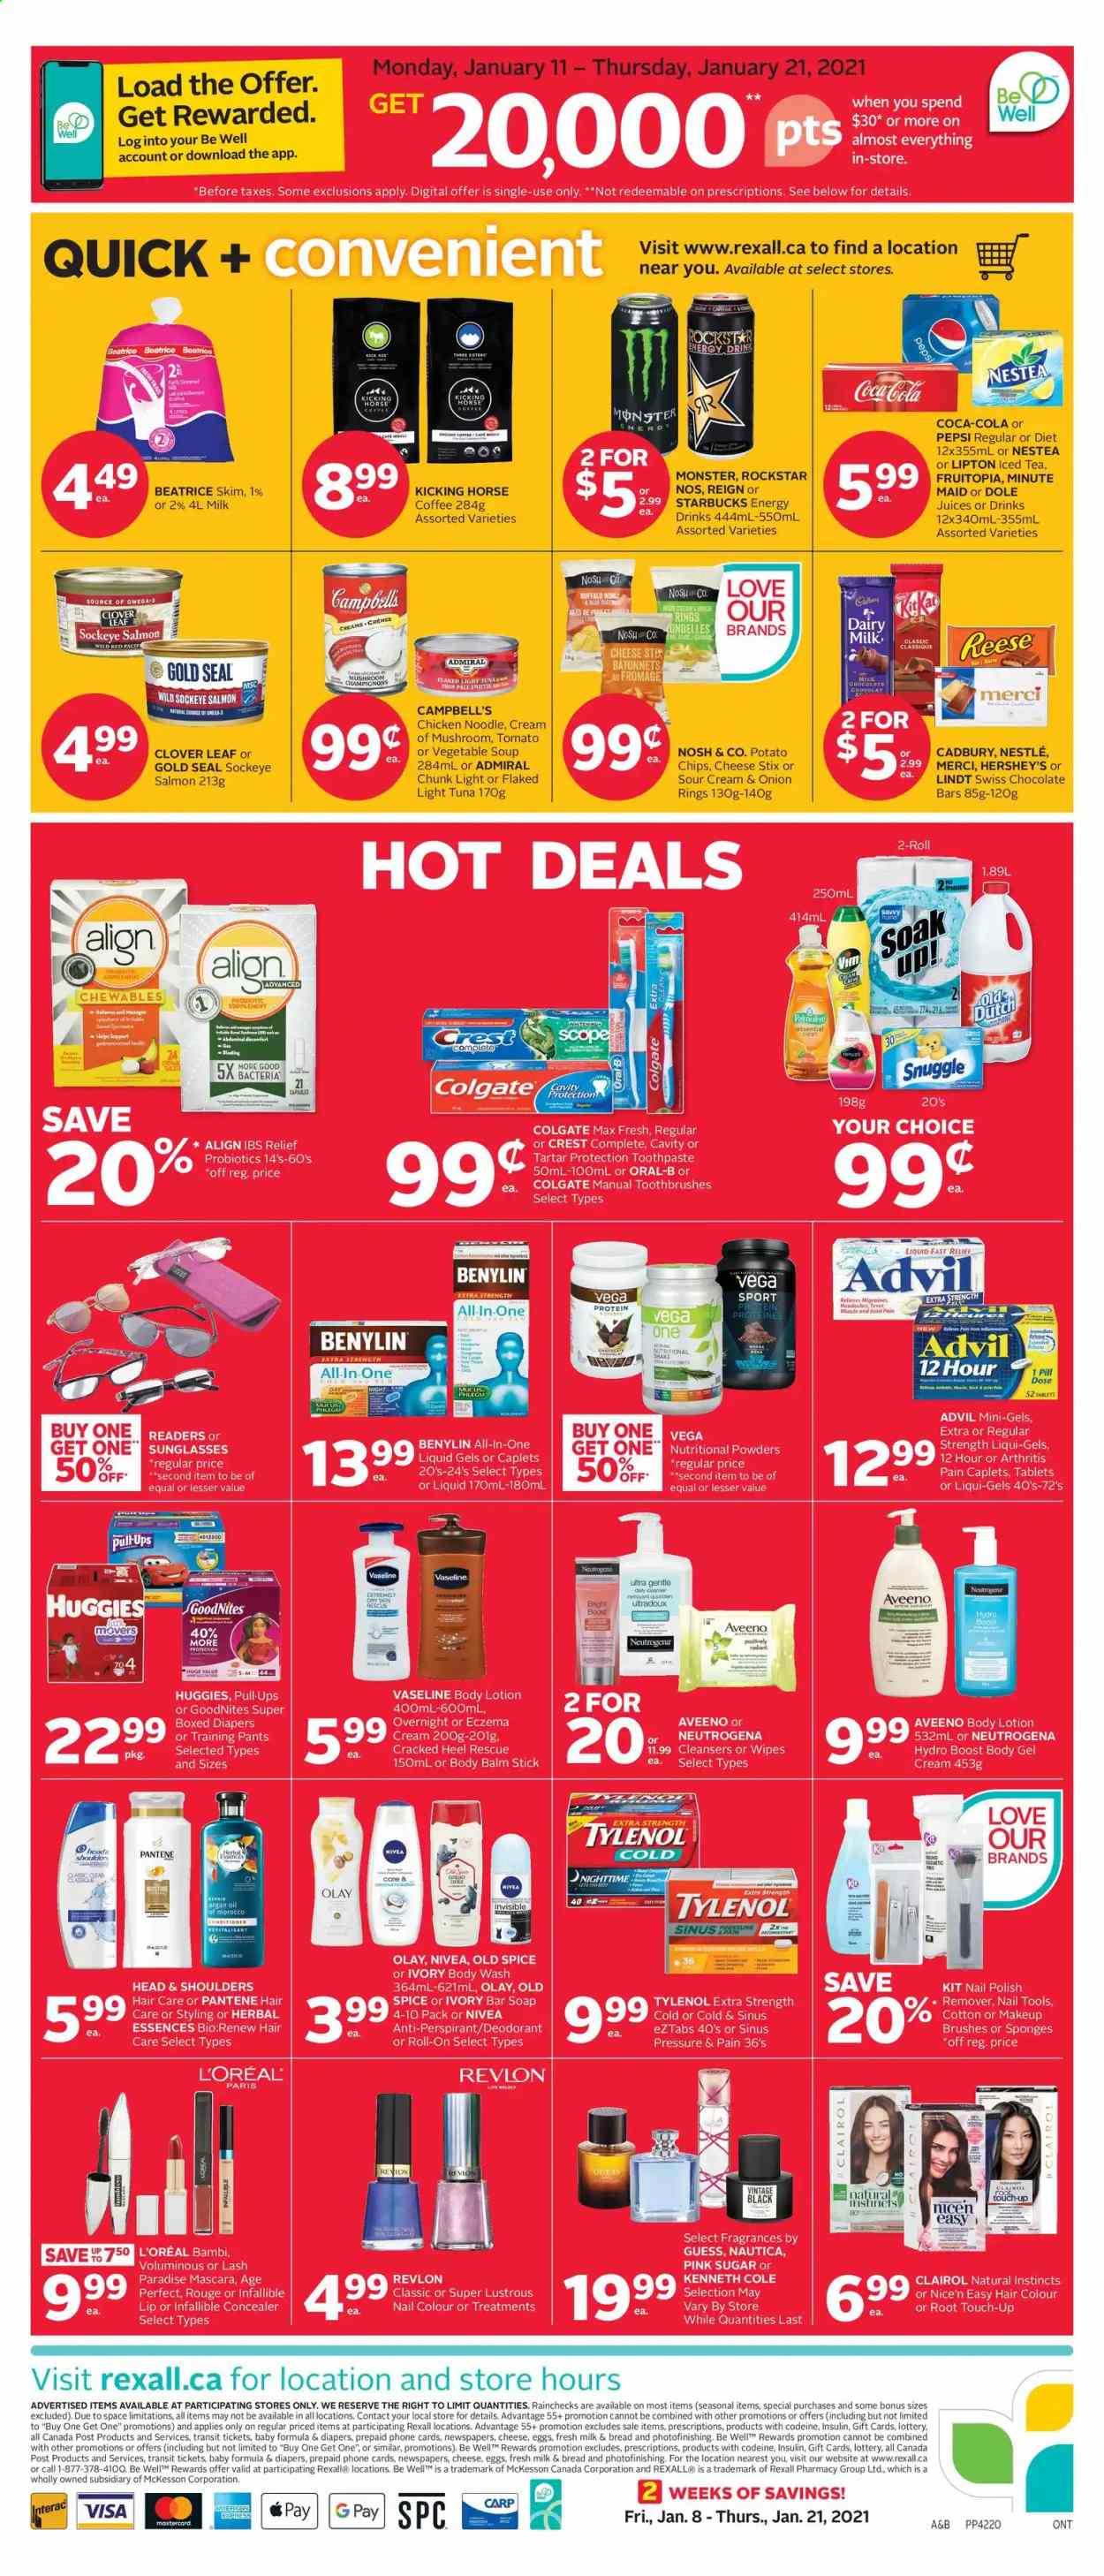 thumbnail - Rexall Flyer - January 08, 2021 - January 21, 2021 - Sales products - milk chocolate, Hershey's, Cadbury, Merci, Dairy Milk, chocolate bar, onion rings, sugar, salmon, soup, light tuna, Dole, noodles, spice, Campbell's, Coca-Cola, Pepsi, juice, energy drink, Monster, ice tea, Clover, Rockstar, fruit punch, Boost, coffee, Starbucks, wipes, pants, nappies, baby pants, Aveeno, Snuggle, body wash, Palmolive, Vaseline, soap bar, soap, toothpaste, Crest, gel cream, L’Oréal, Olay, Root Touch-Up, Clairol, Revlon, hair color, Herbal Essences, body lotion, anti-perspirant, roll-on, Guess, polish, corrector, makeup, sponge, Tylenol, probiotics, argan oil, Advil Rapid, Benylin, Nestlé, mascara, Neutrogena, tuna, Head & Shoulders, Huggies, Pantene, Nivea, Old Spice, Oral-B, chips, deodorant. Page 8.